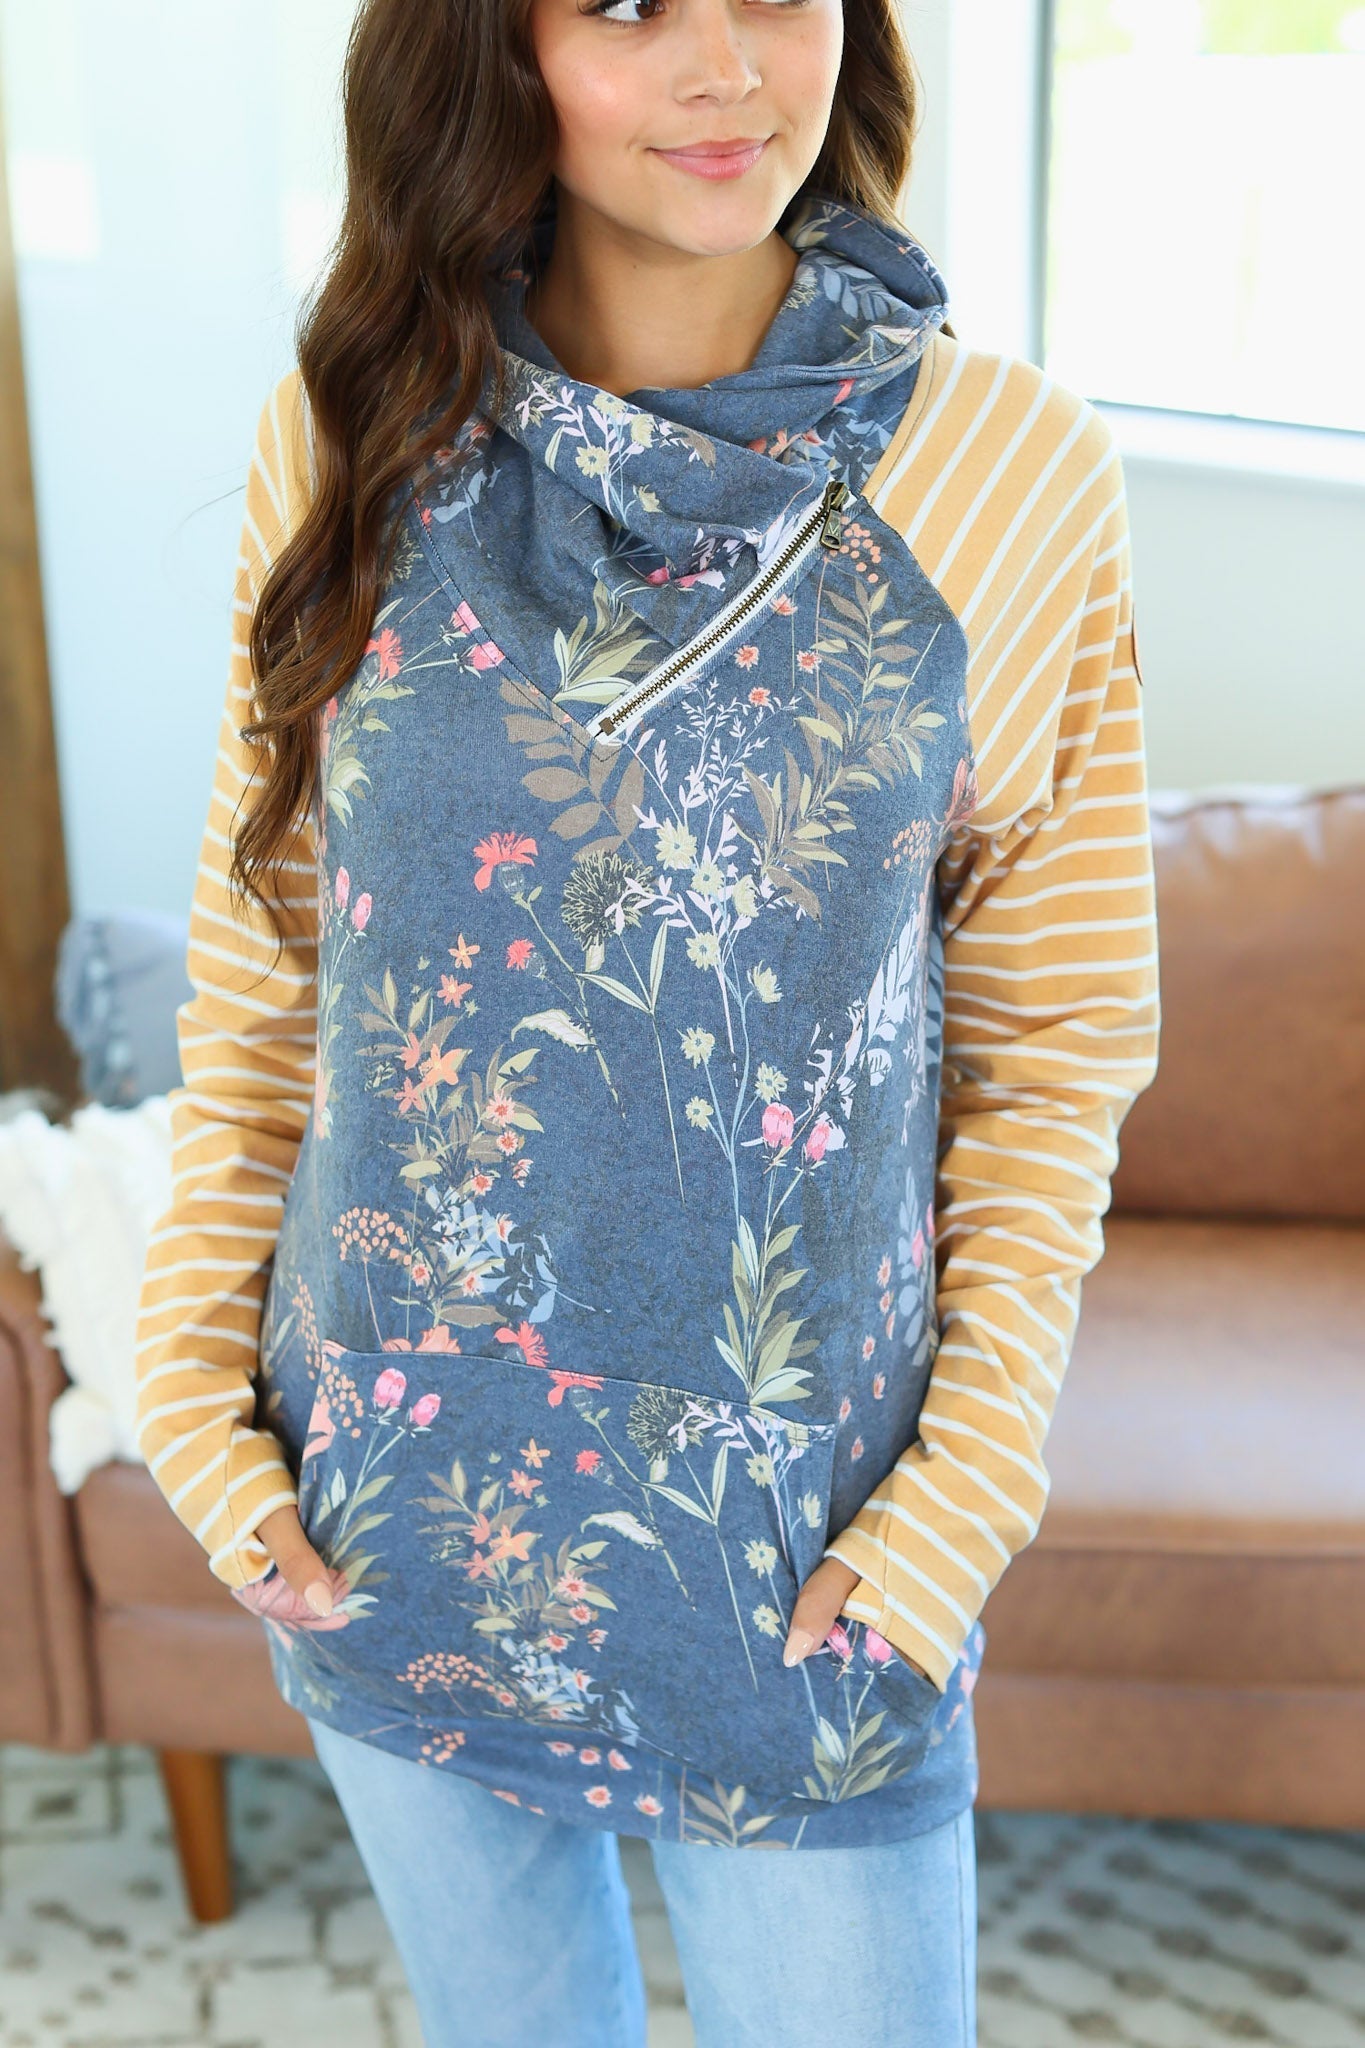 IN STOCK Classic Zoey ZipCowl Sweatshirt - Navy and Mustard Mix - AnnRose Boutique